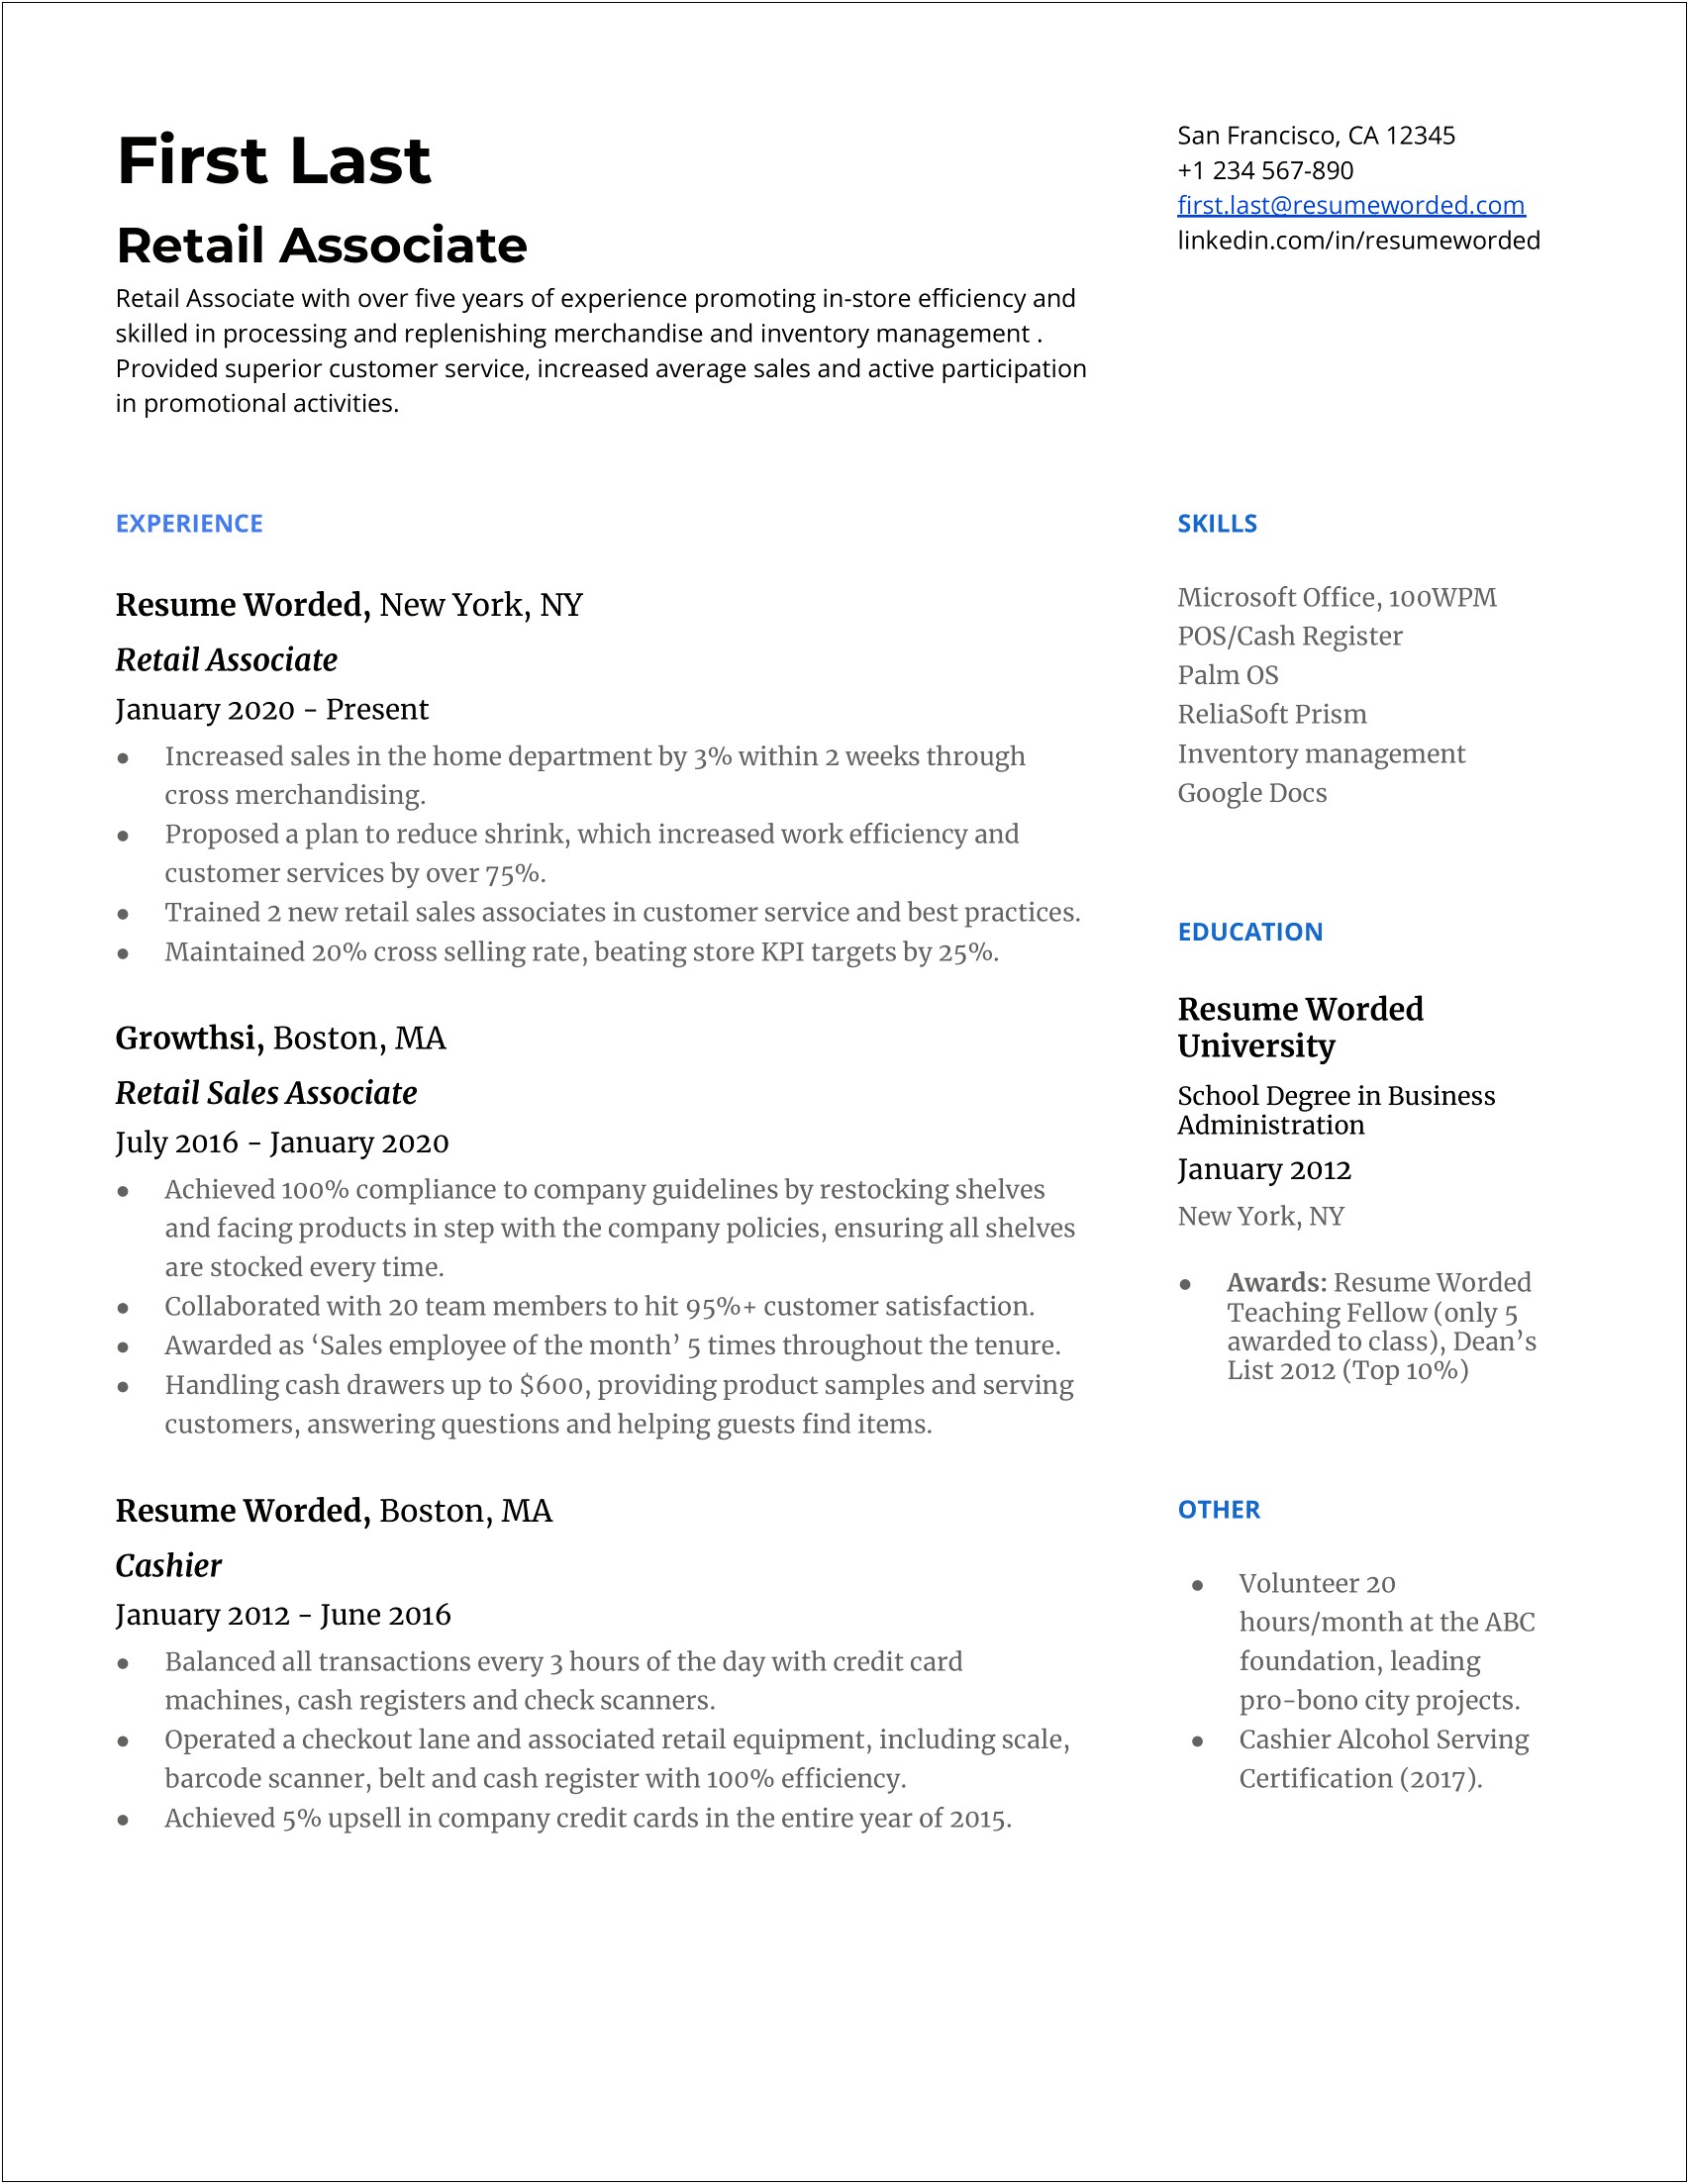 Patient Access Associate Resume Objective Examples